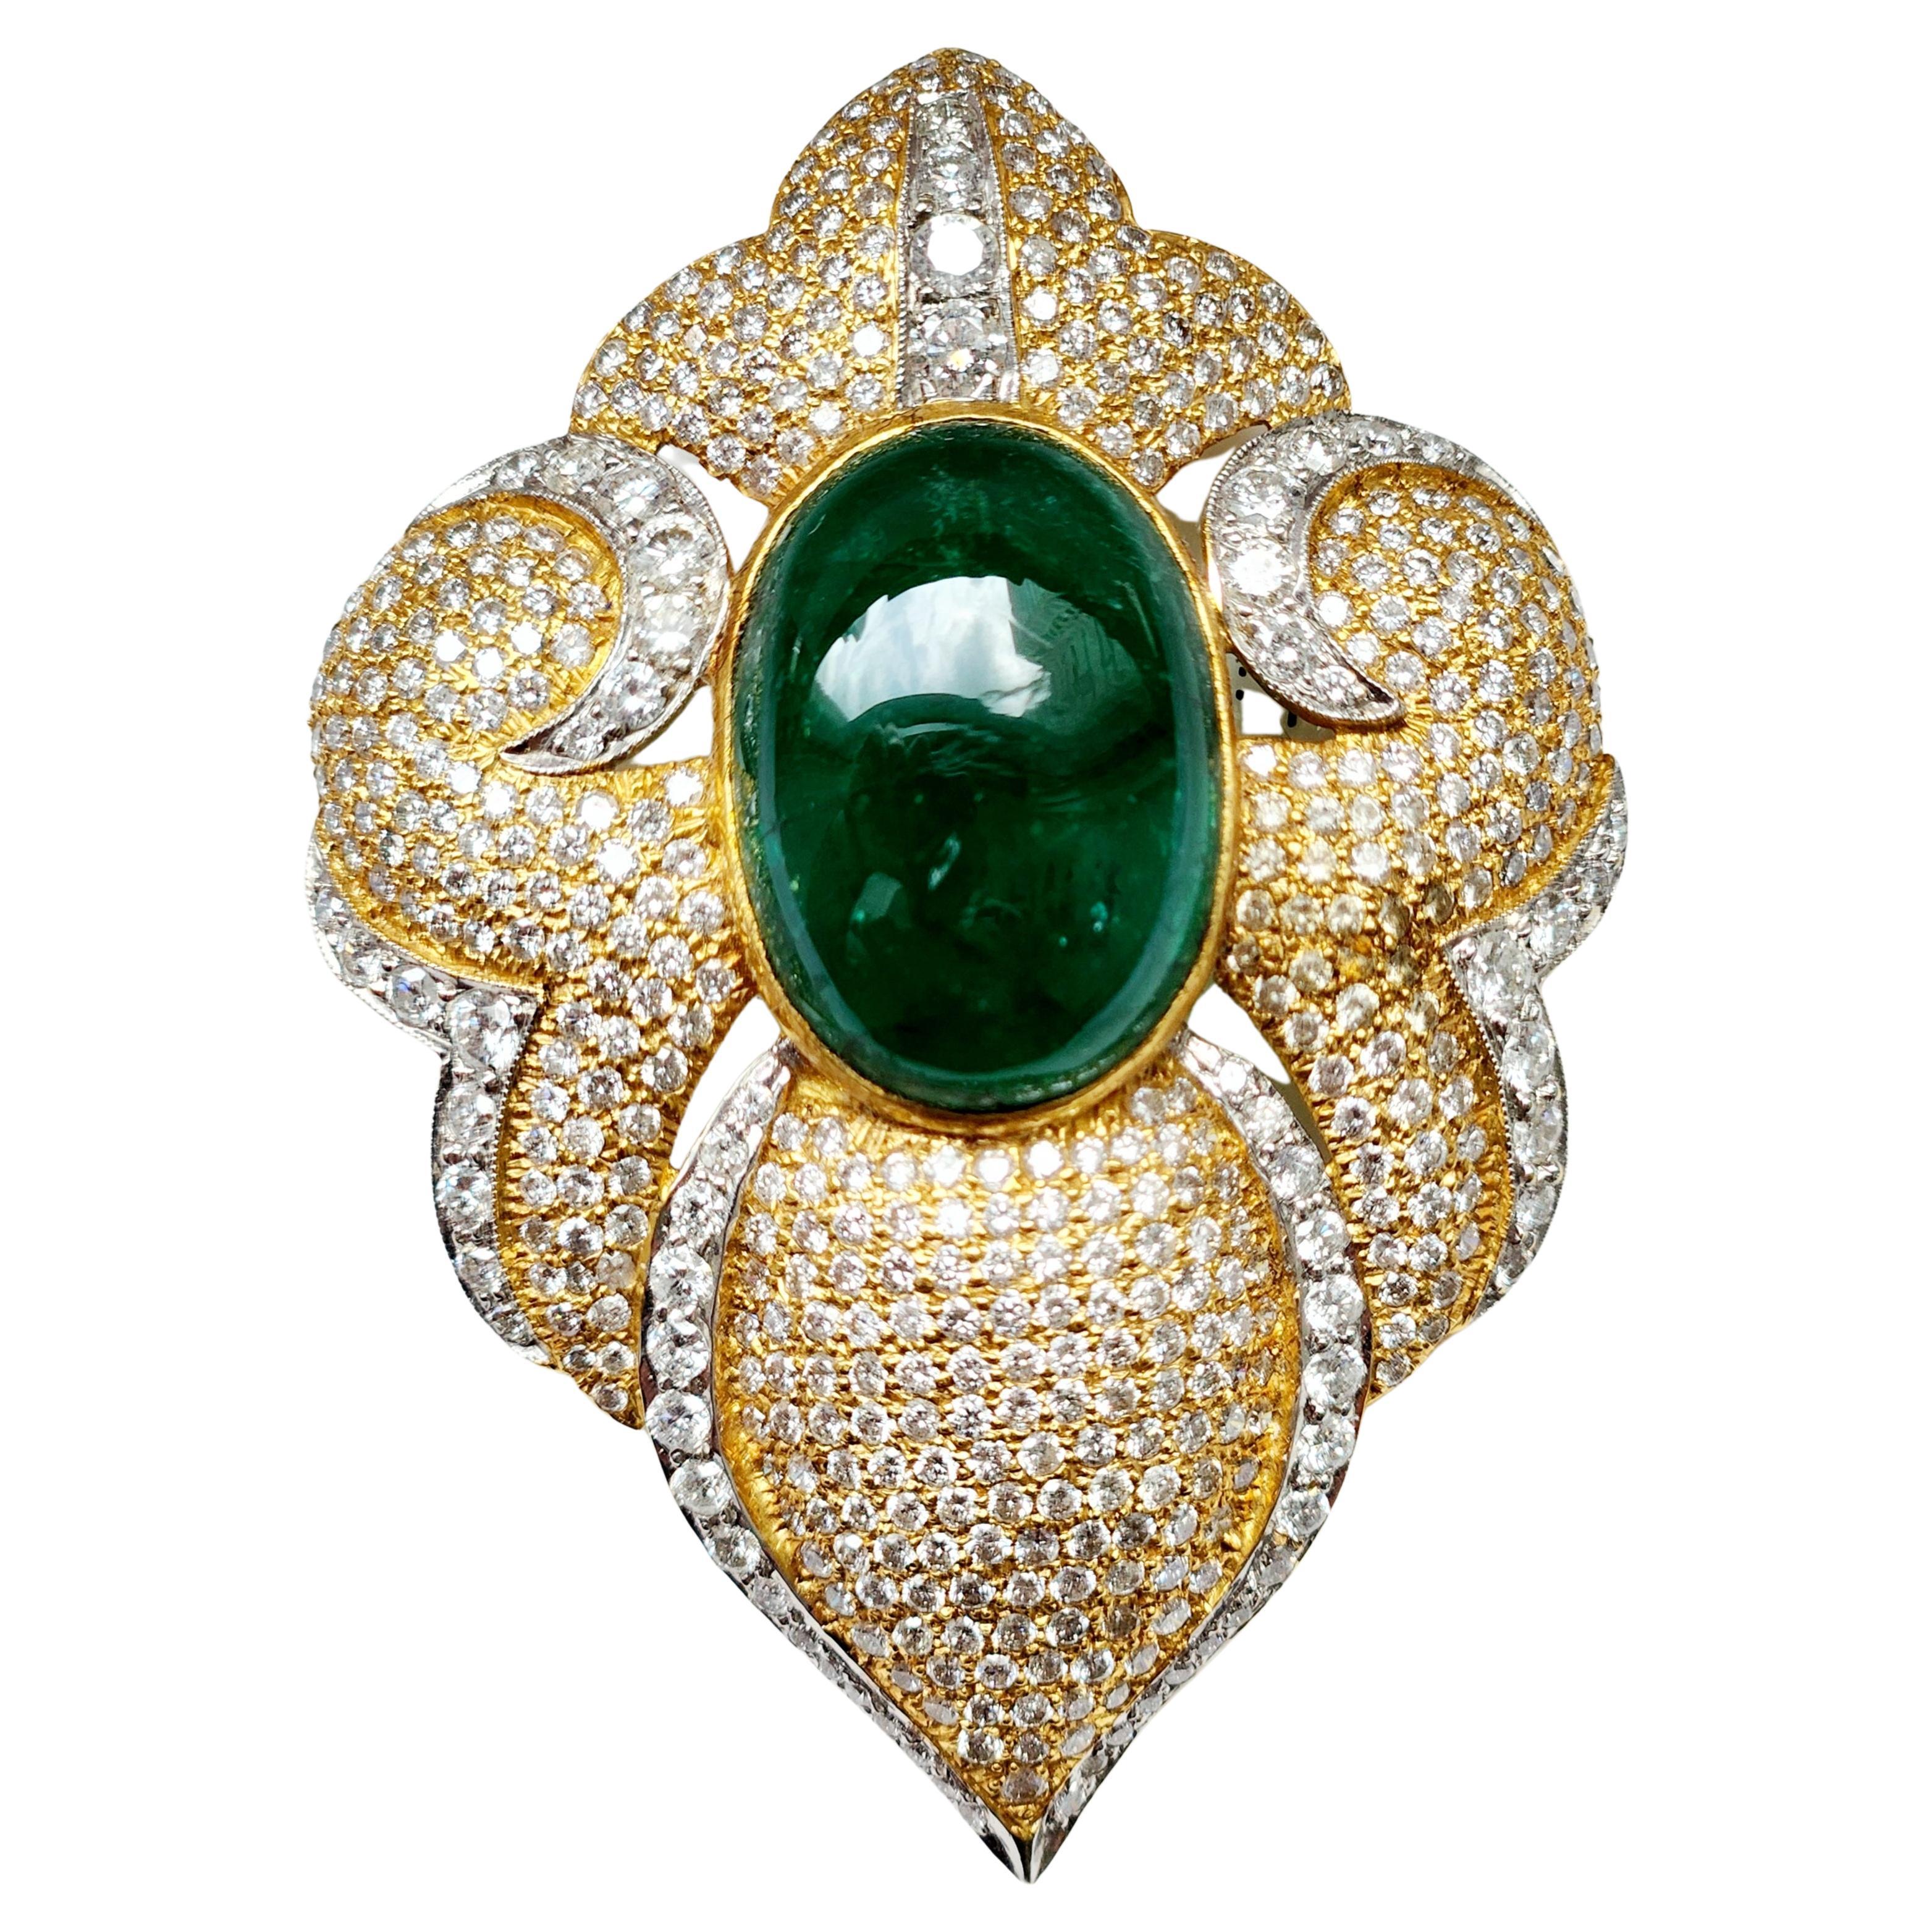 Fancy Art Deco Pendant Brooch with Green Emerald Cab For Sale